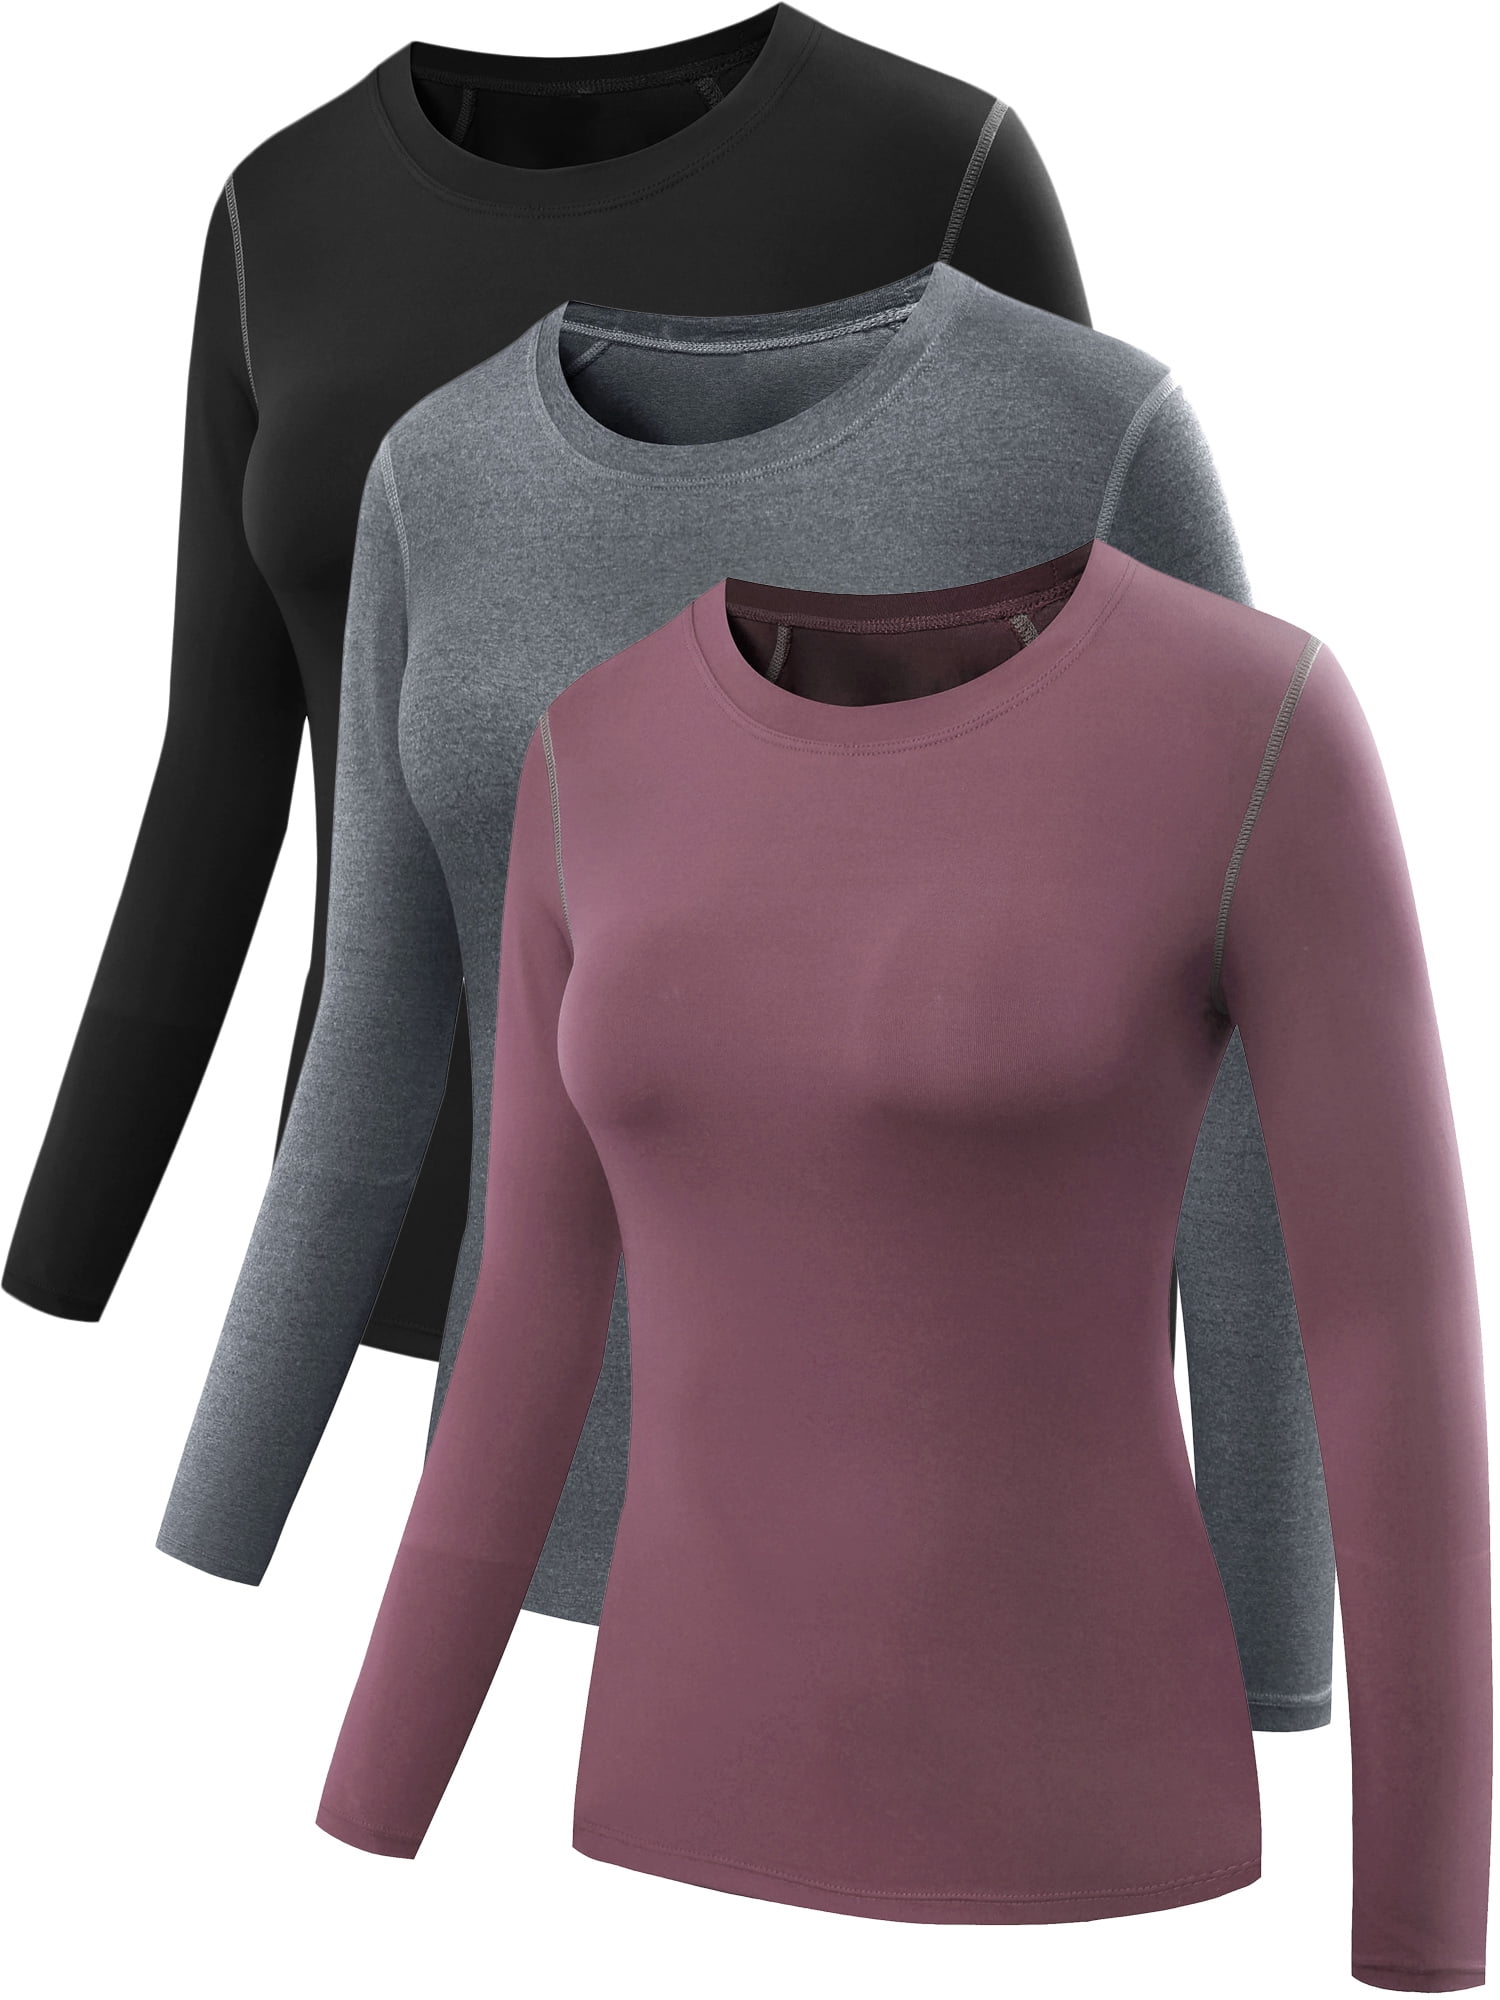 NELEUS Womens Compression Shirts Long Sleeve Workout Yoga T Shirt V Neck 3  Pack,Black+Gray+Rosy Brown,US Size XL